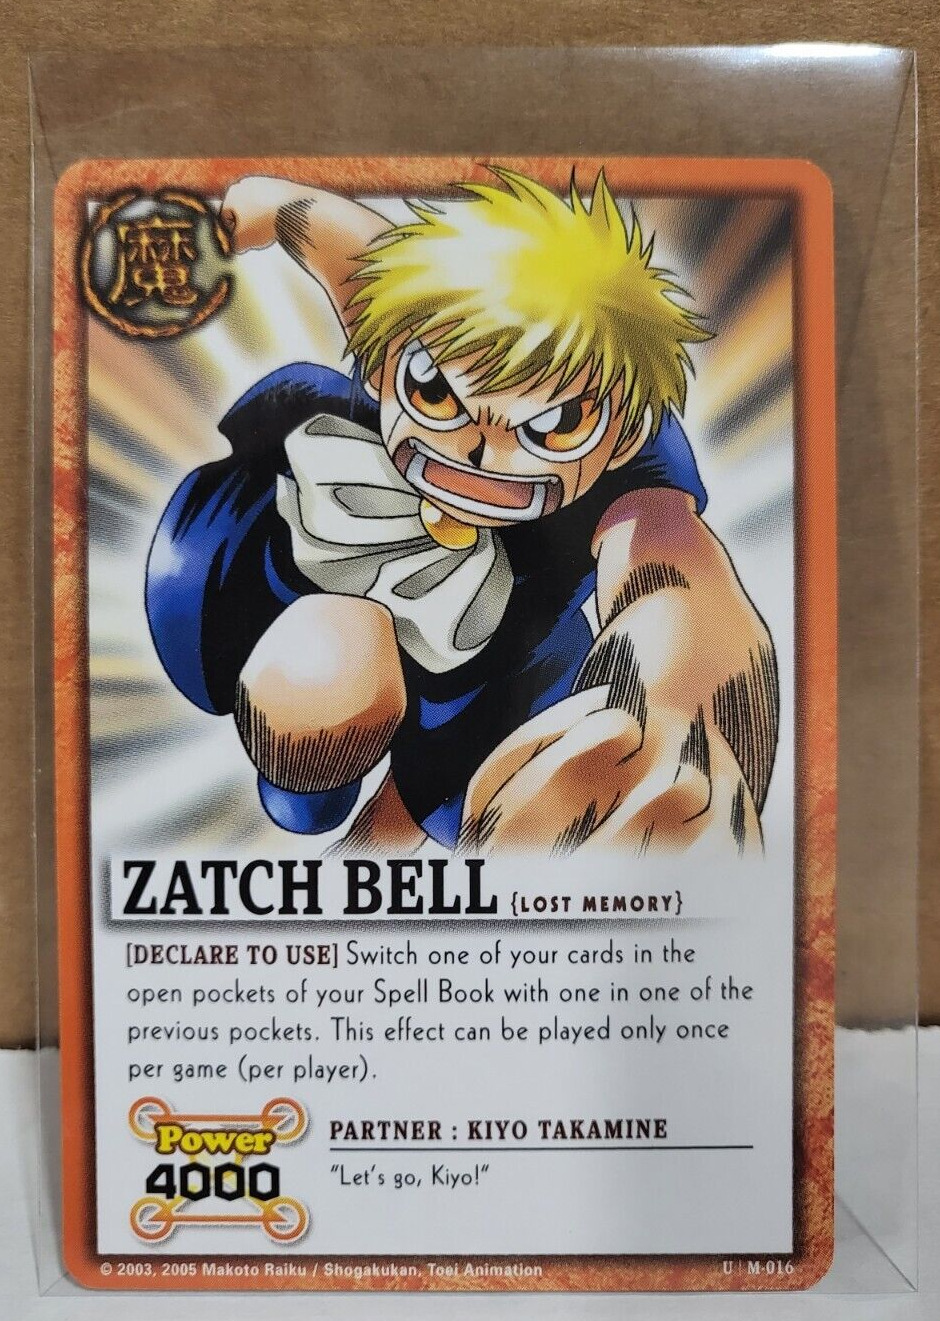 VINTAGE 2003 ZATCH BELL CARD BATTLE GAME TRADING CARD LOST MEMORY M-016